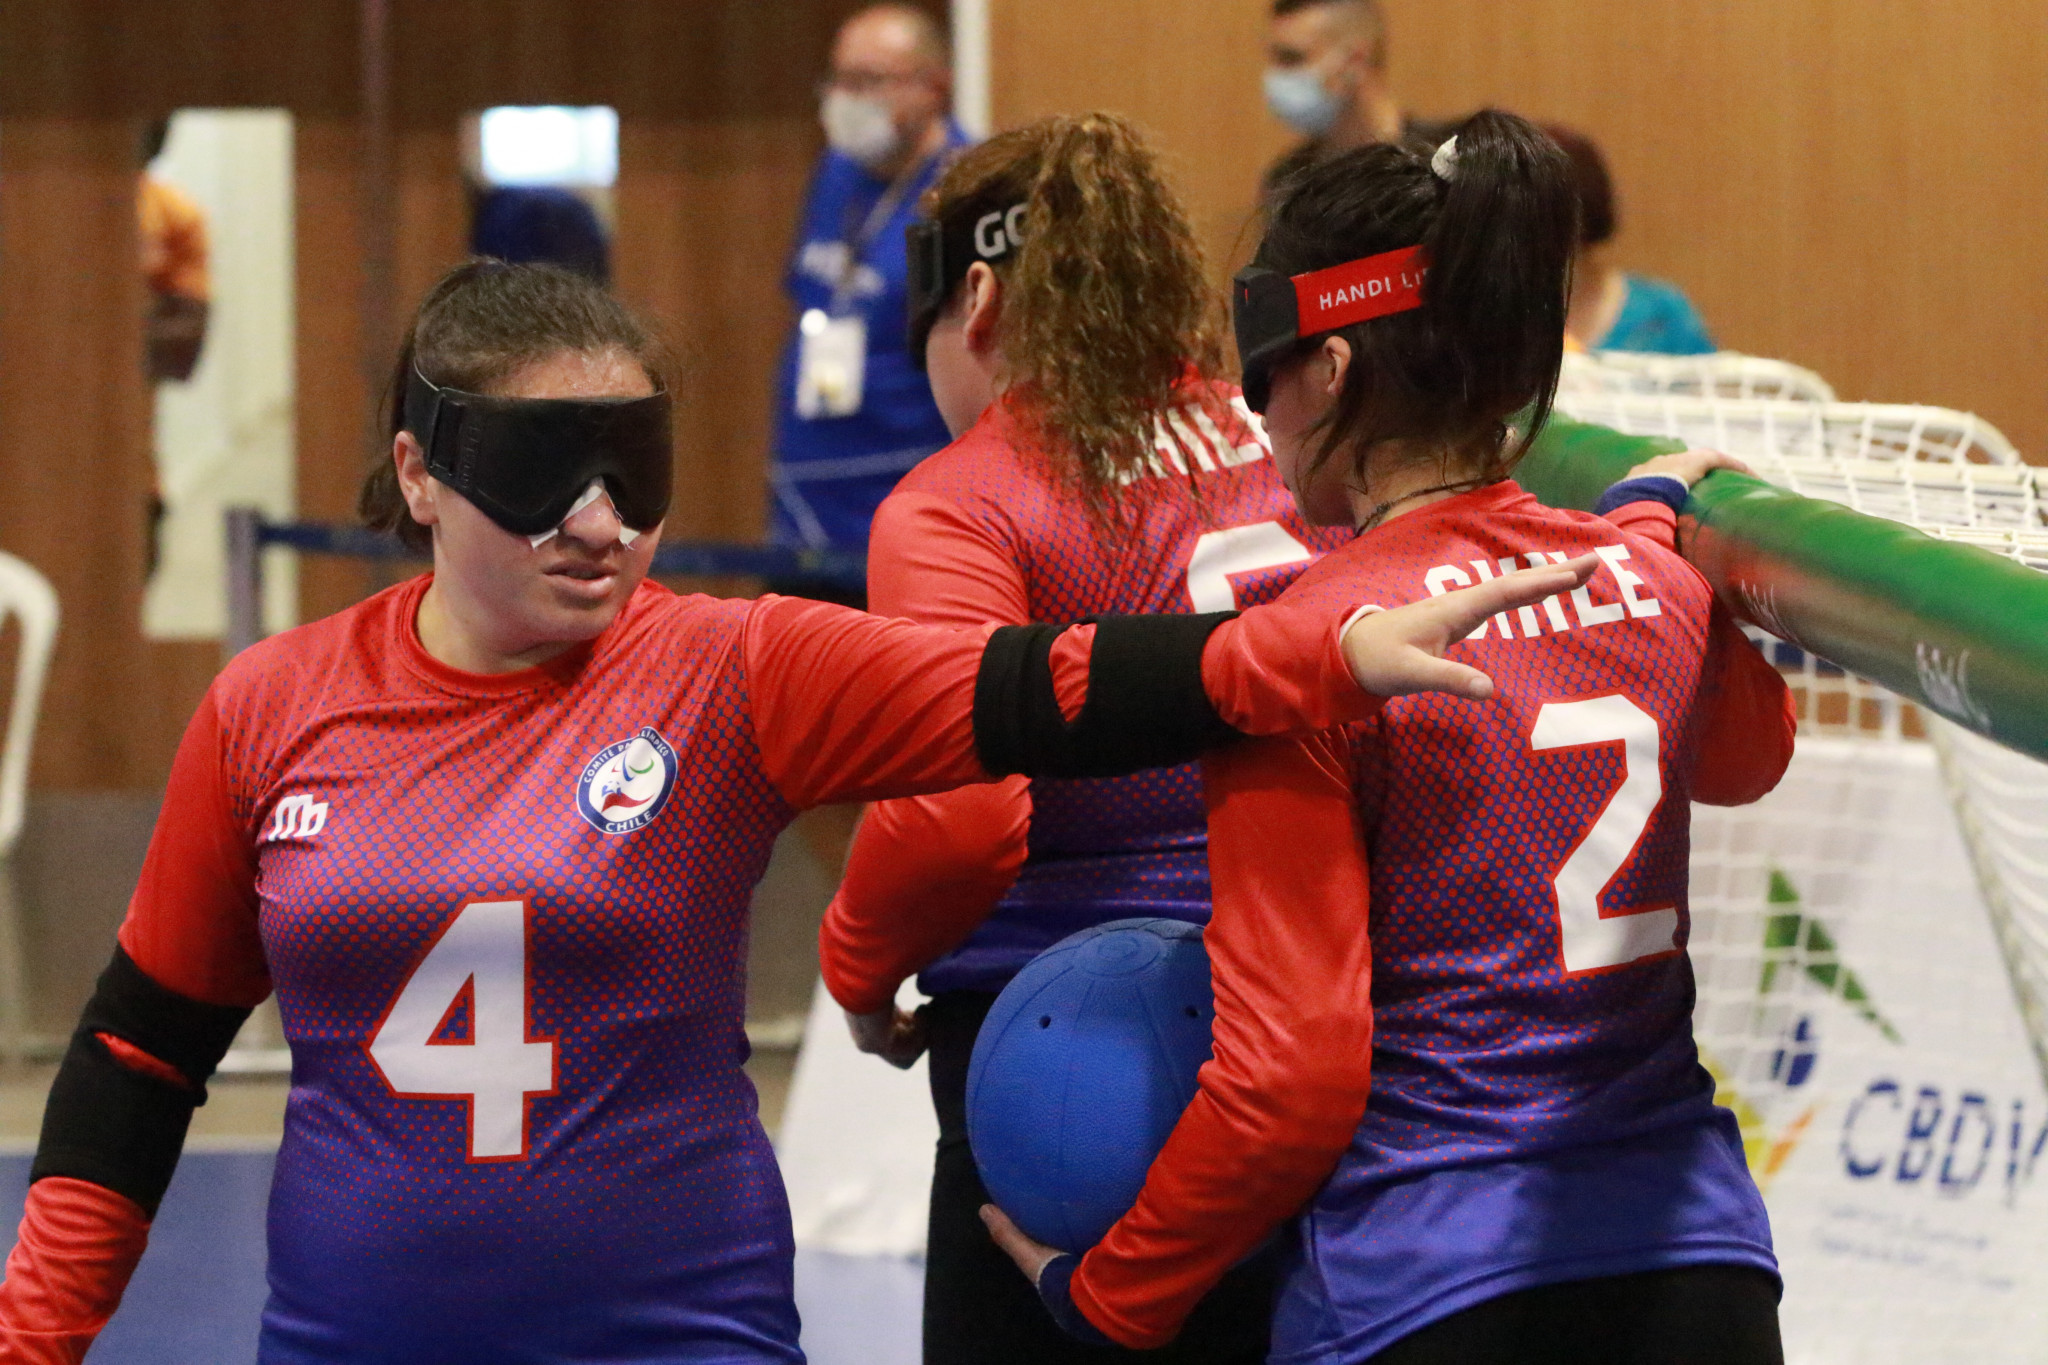 Debutants Chile into women's quarter-finals at IBSA Goalball Americas Championships